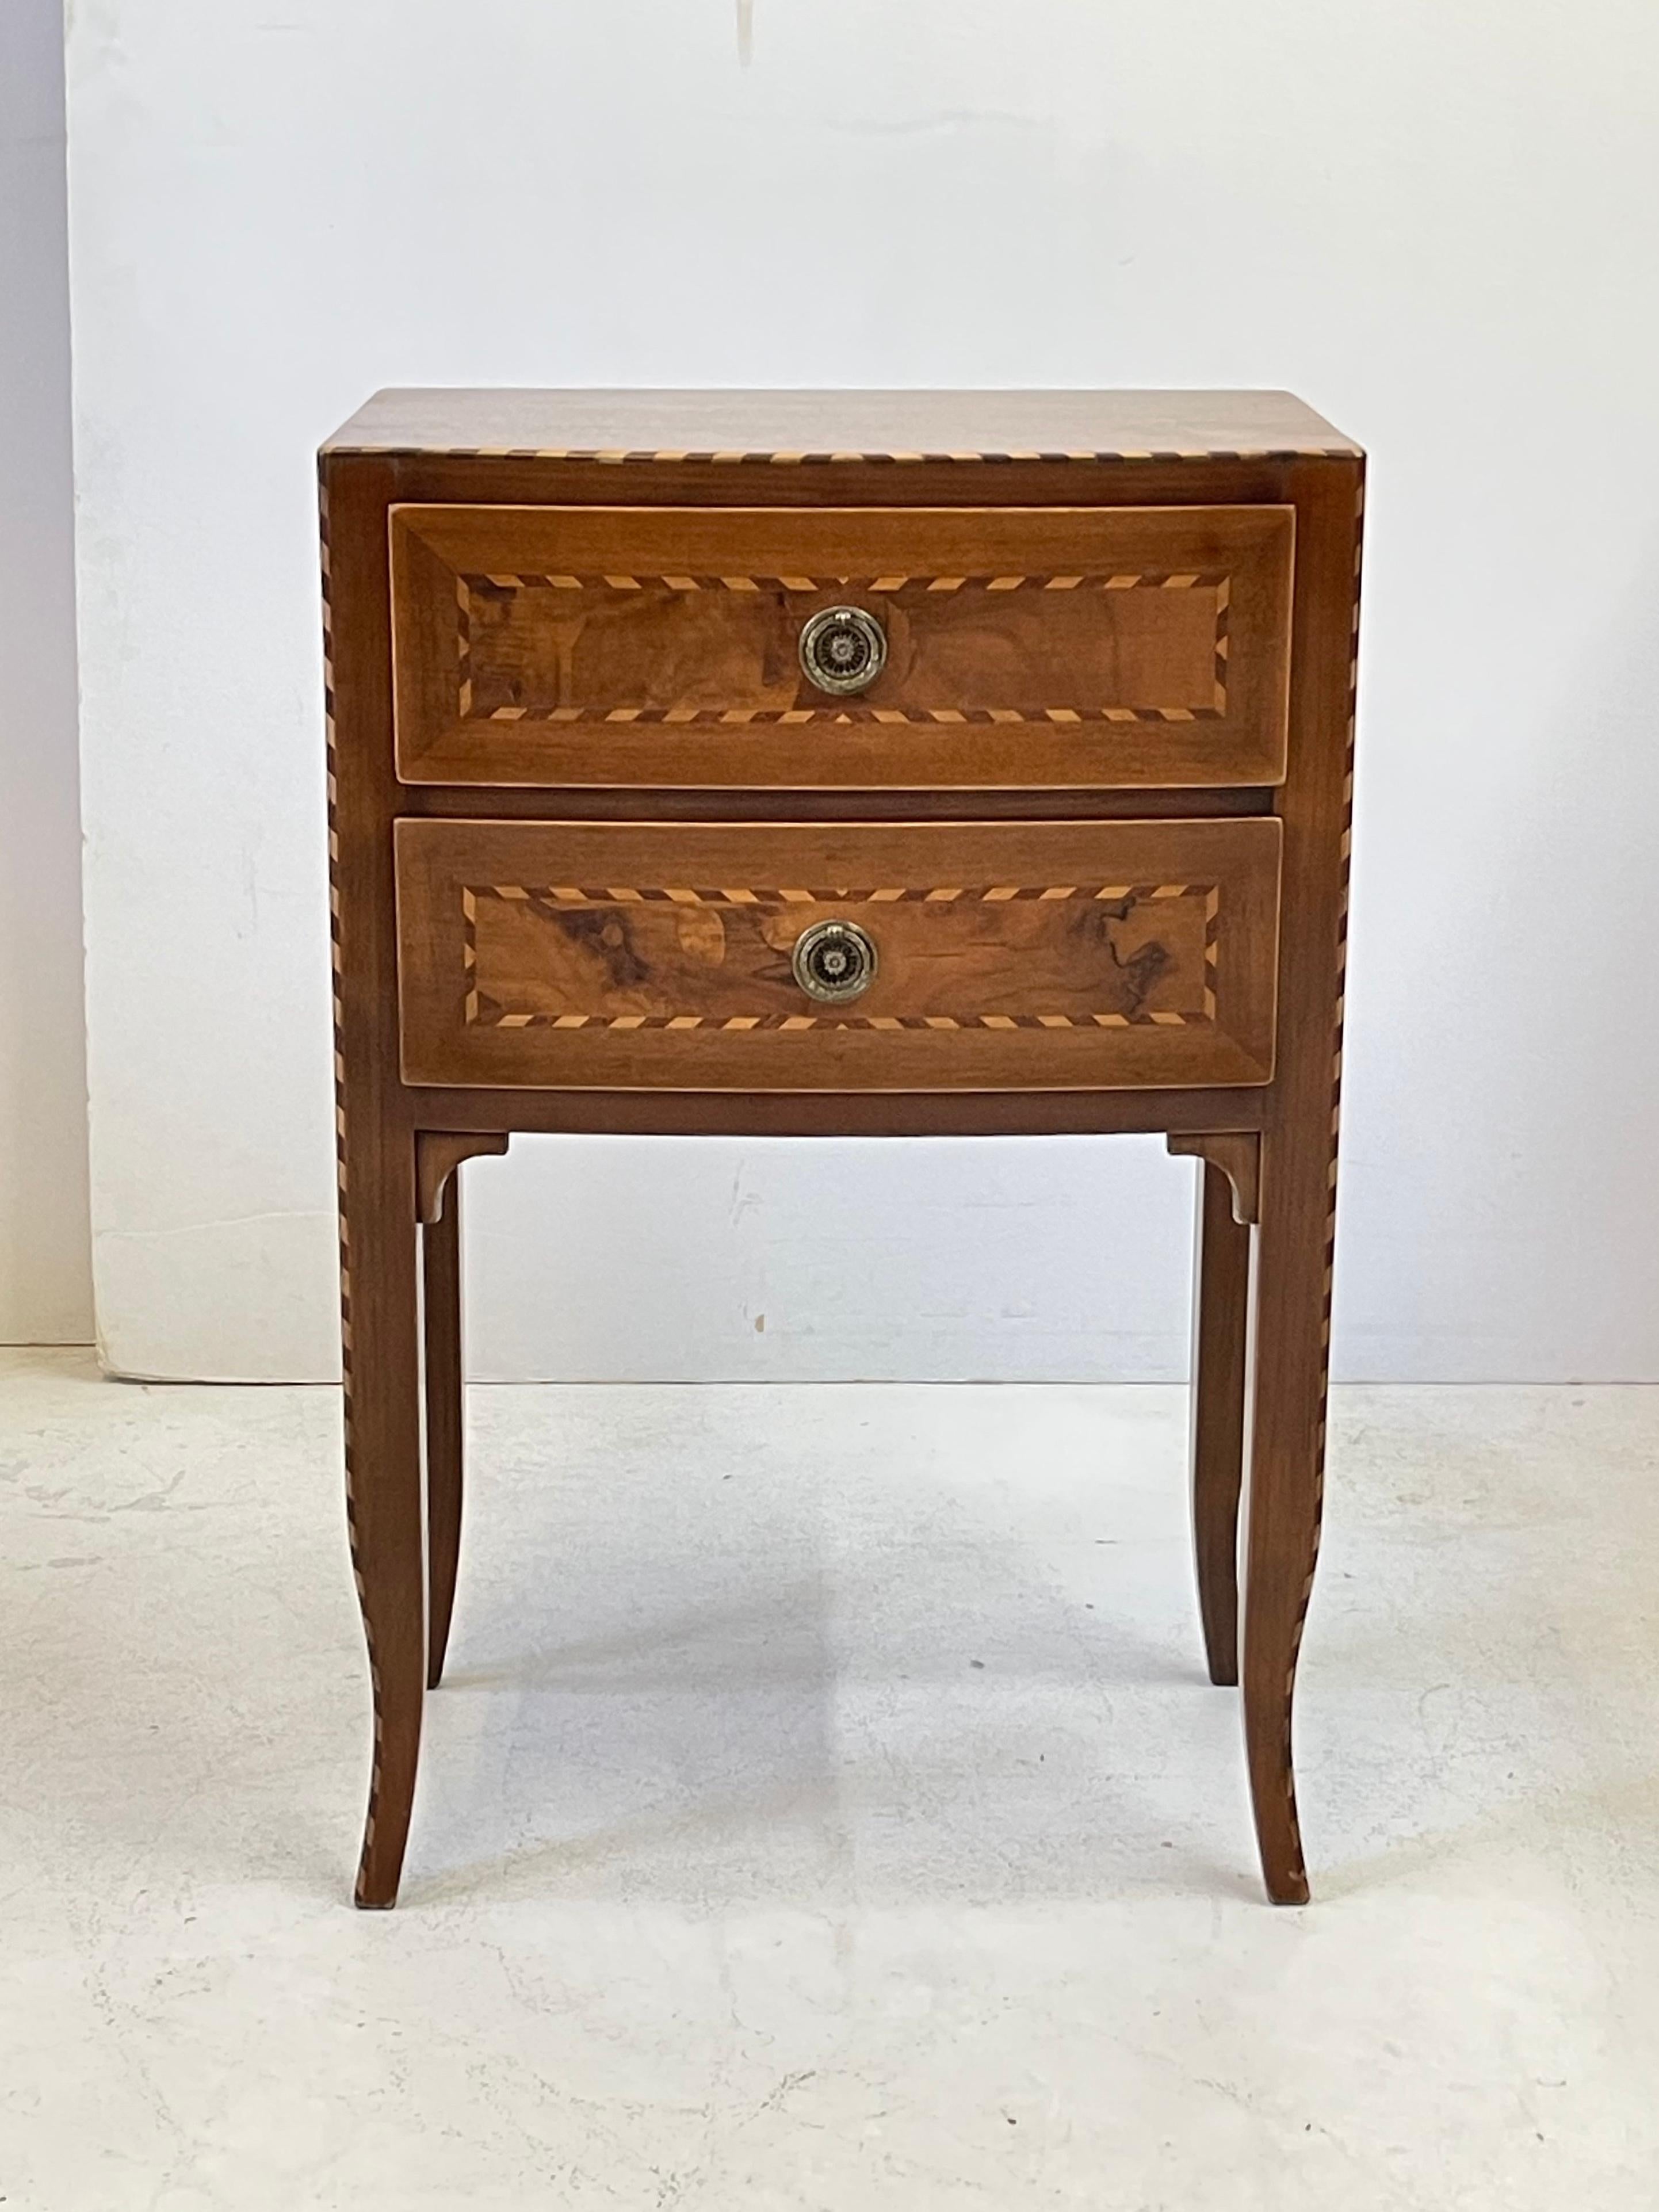 Early 20th Century Italian side table of exceptional craftsmanship having a walnut bow-front case trimmed with banded inlay and holding two drawers. The drawer fronts are beautifully decorated with inset burl walnut panels outlined by cross banded